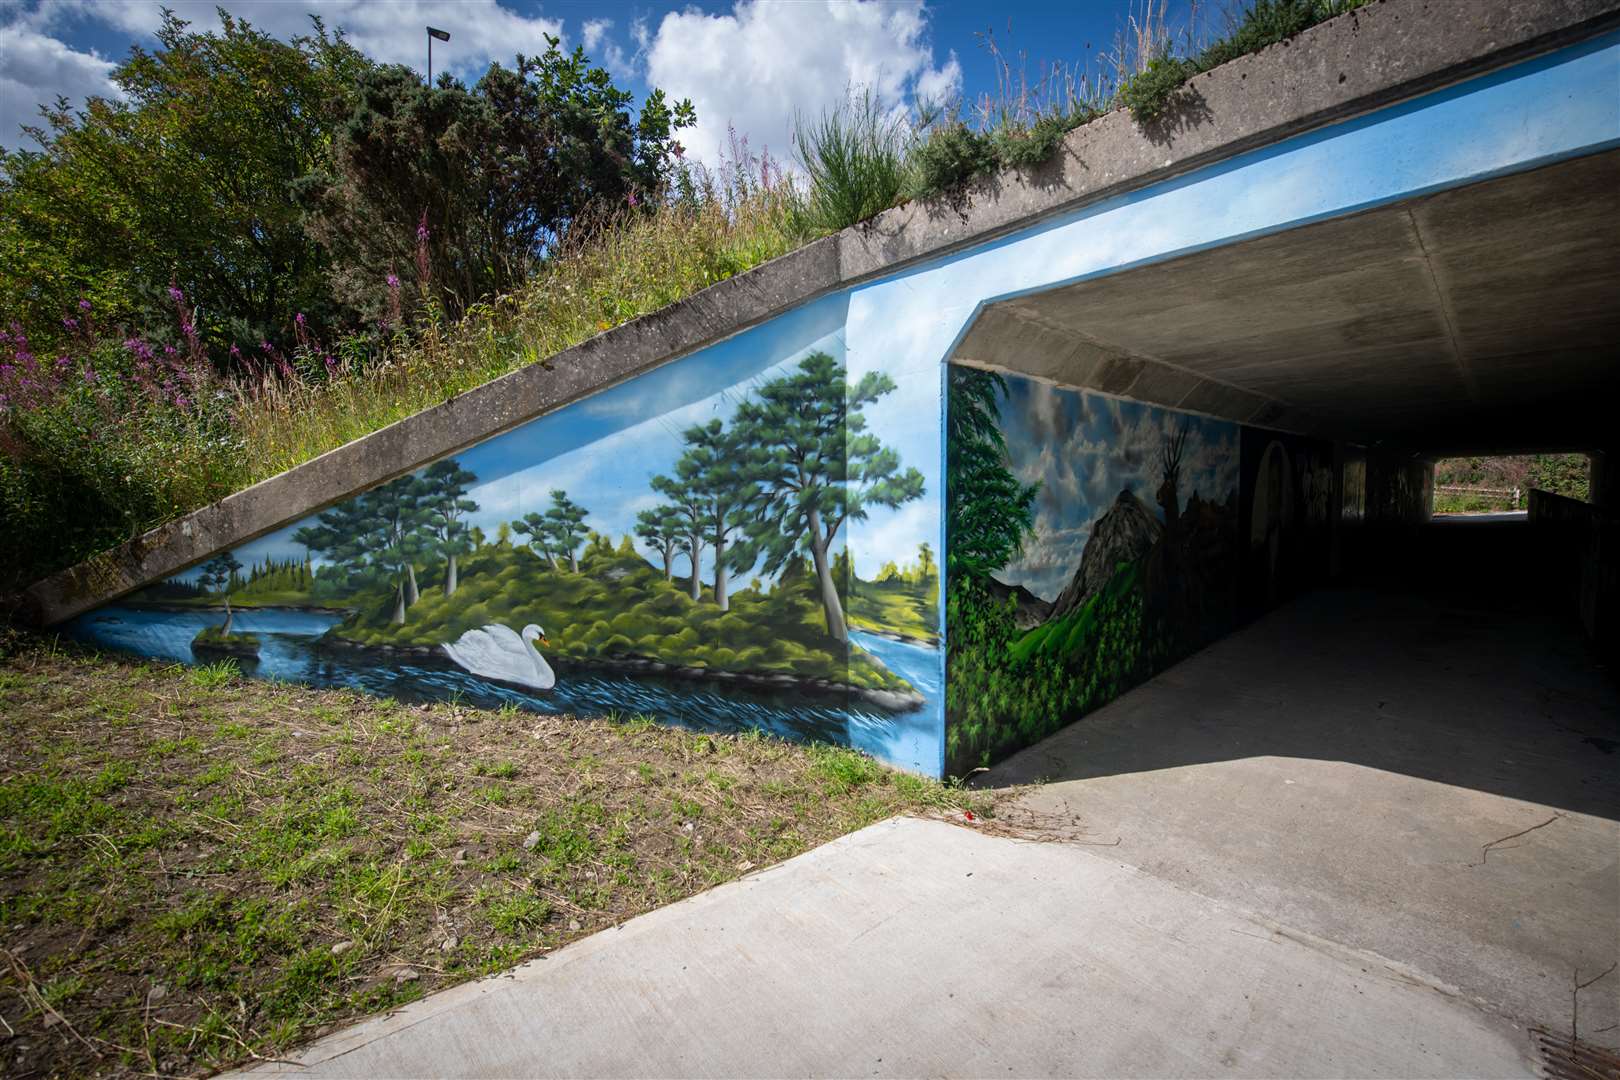 Forest theme at entrance of the North Kessock underpass.